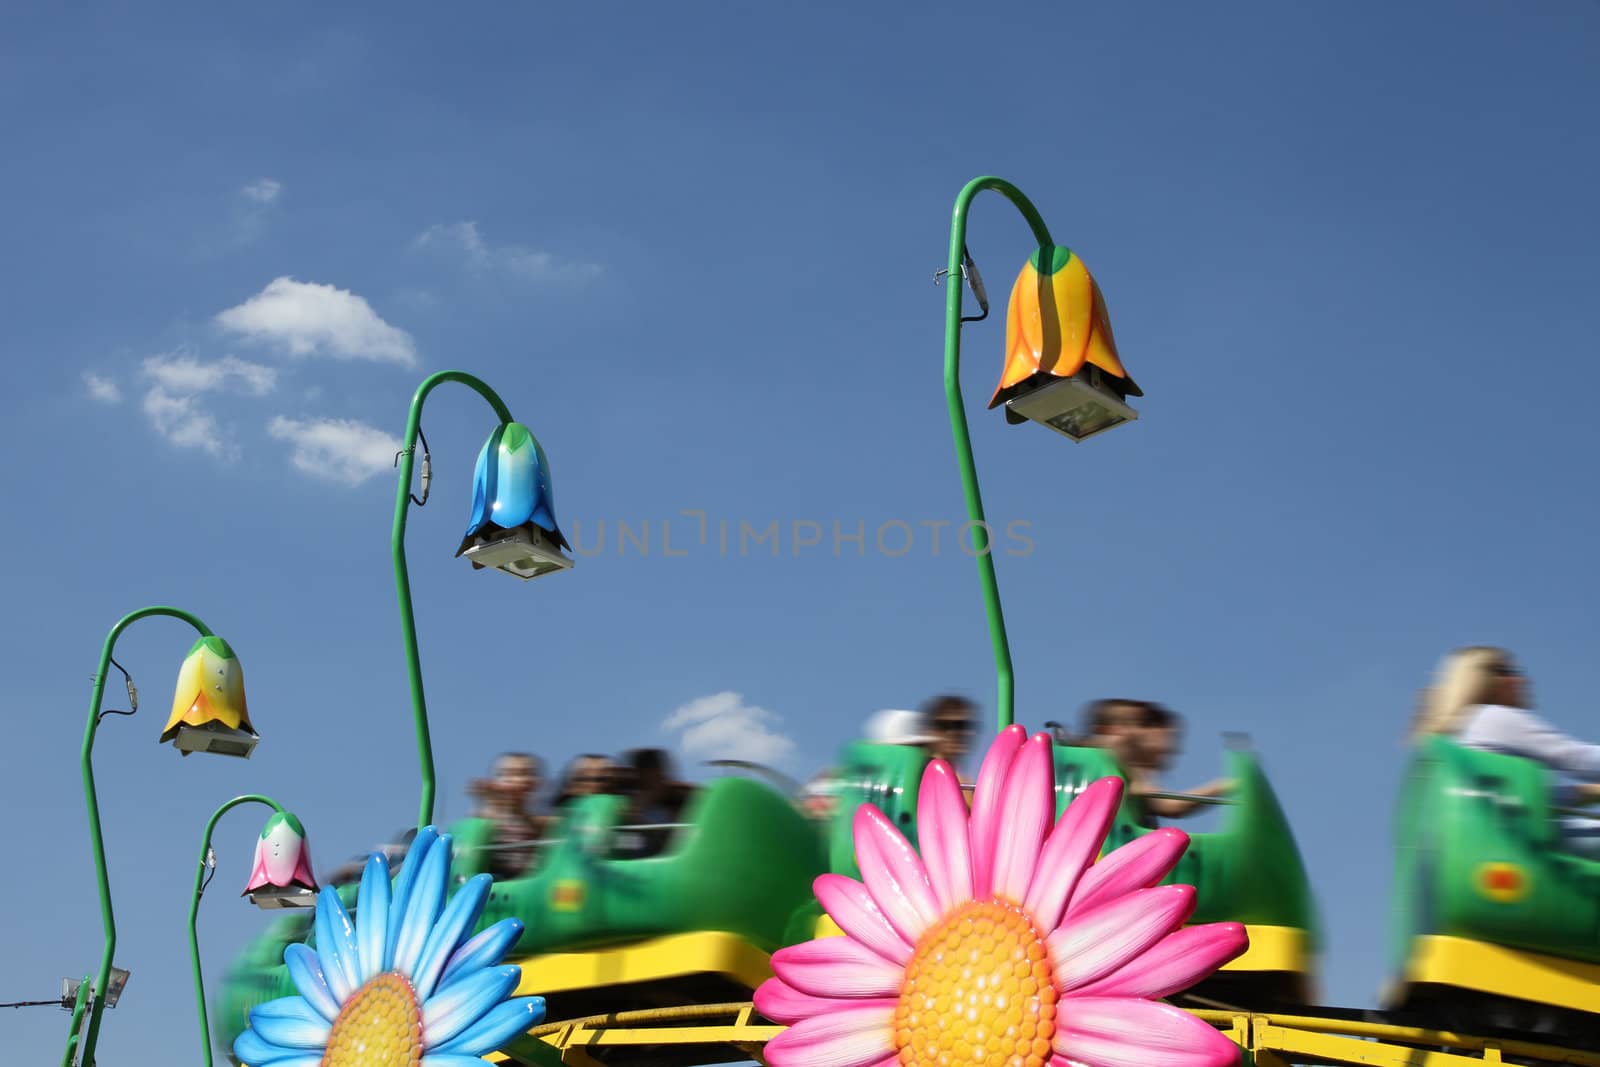 rollercoaster for childrens in an amusement park by daboost